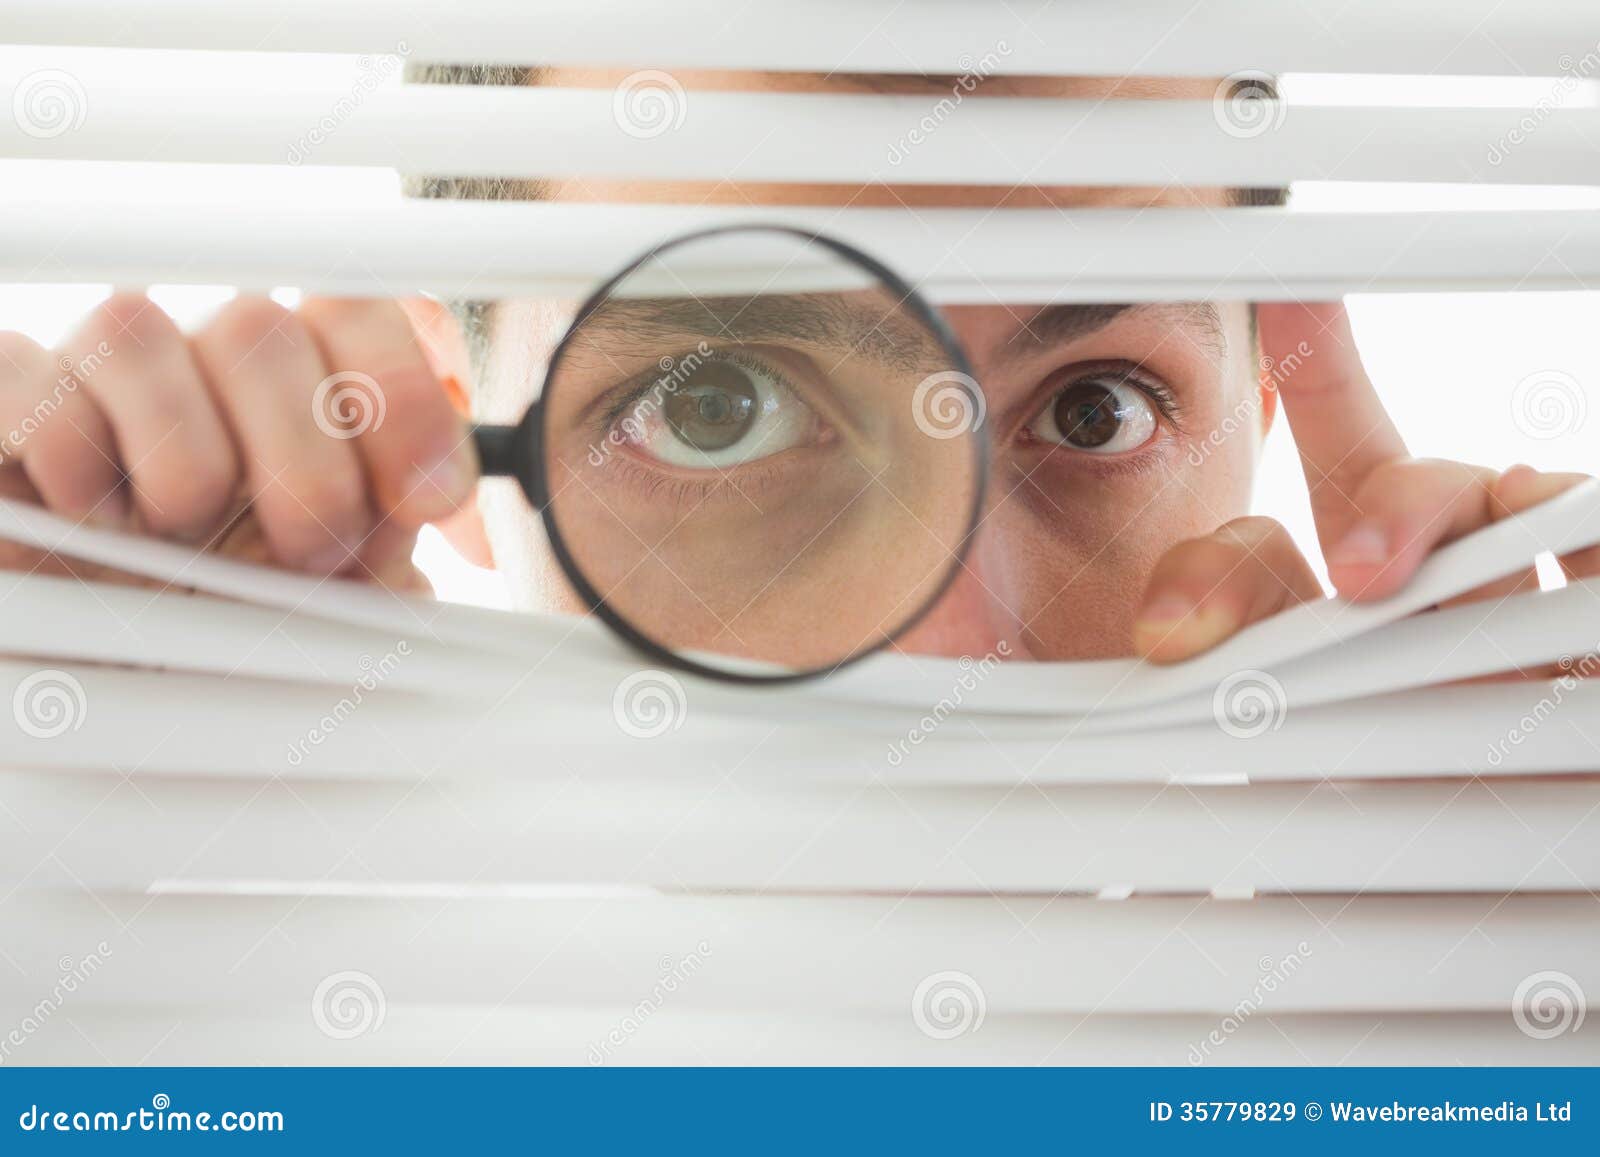 male eyes spying through roller blind with loupe